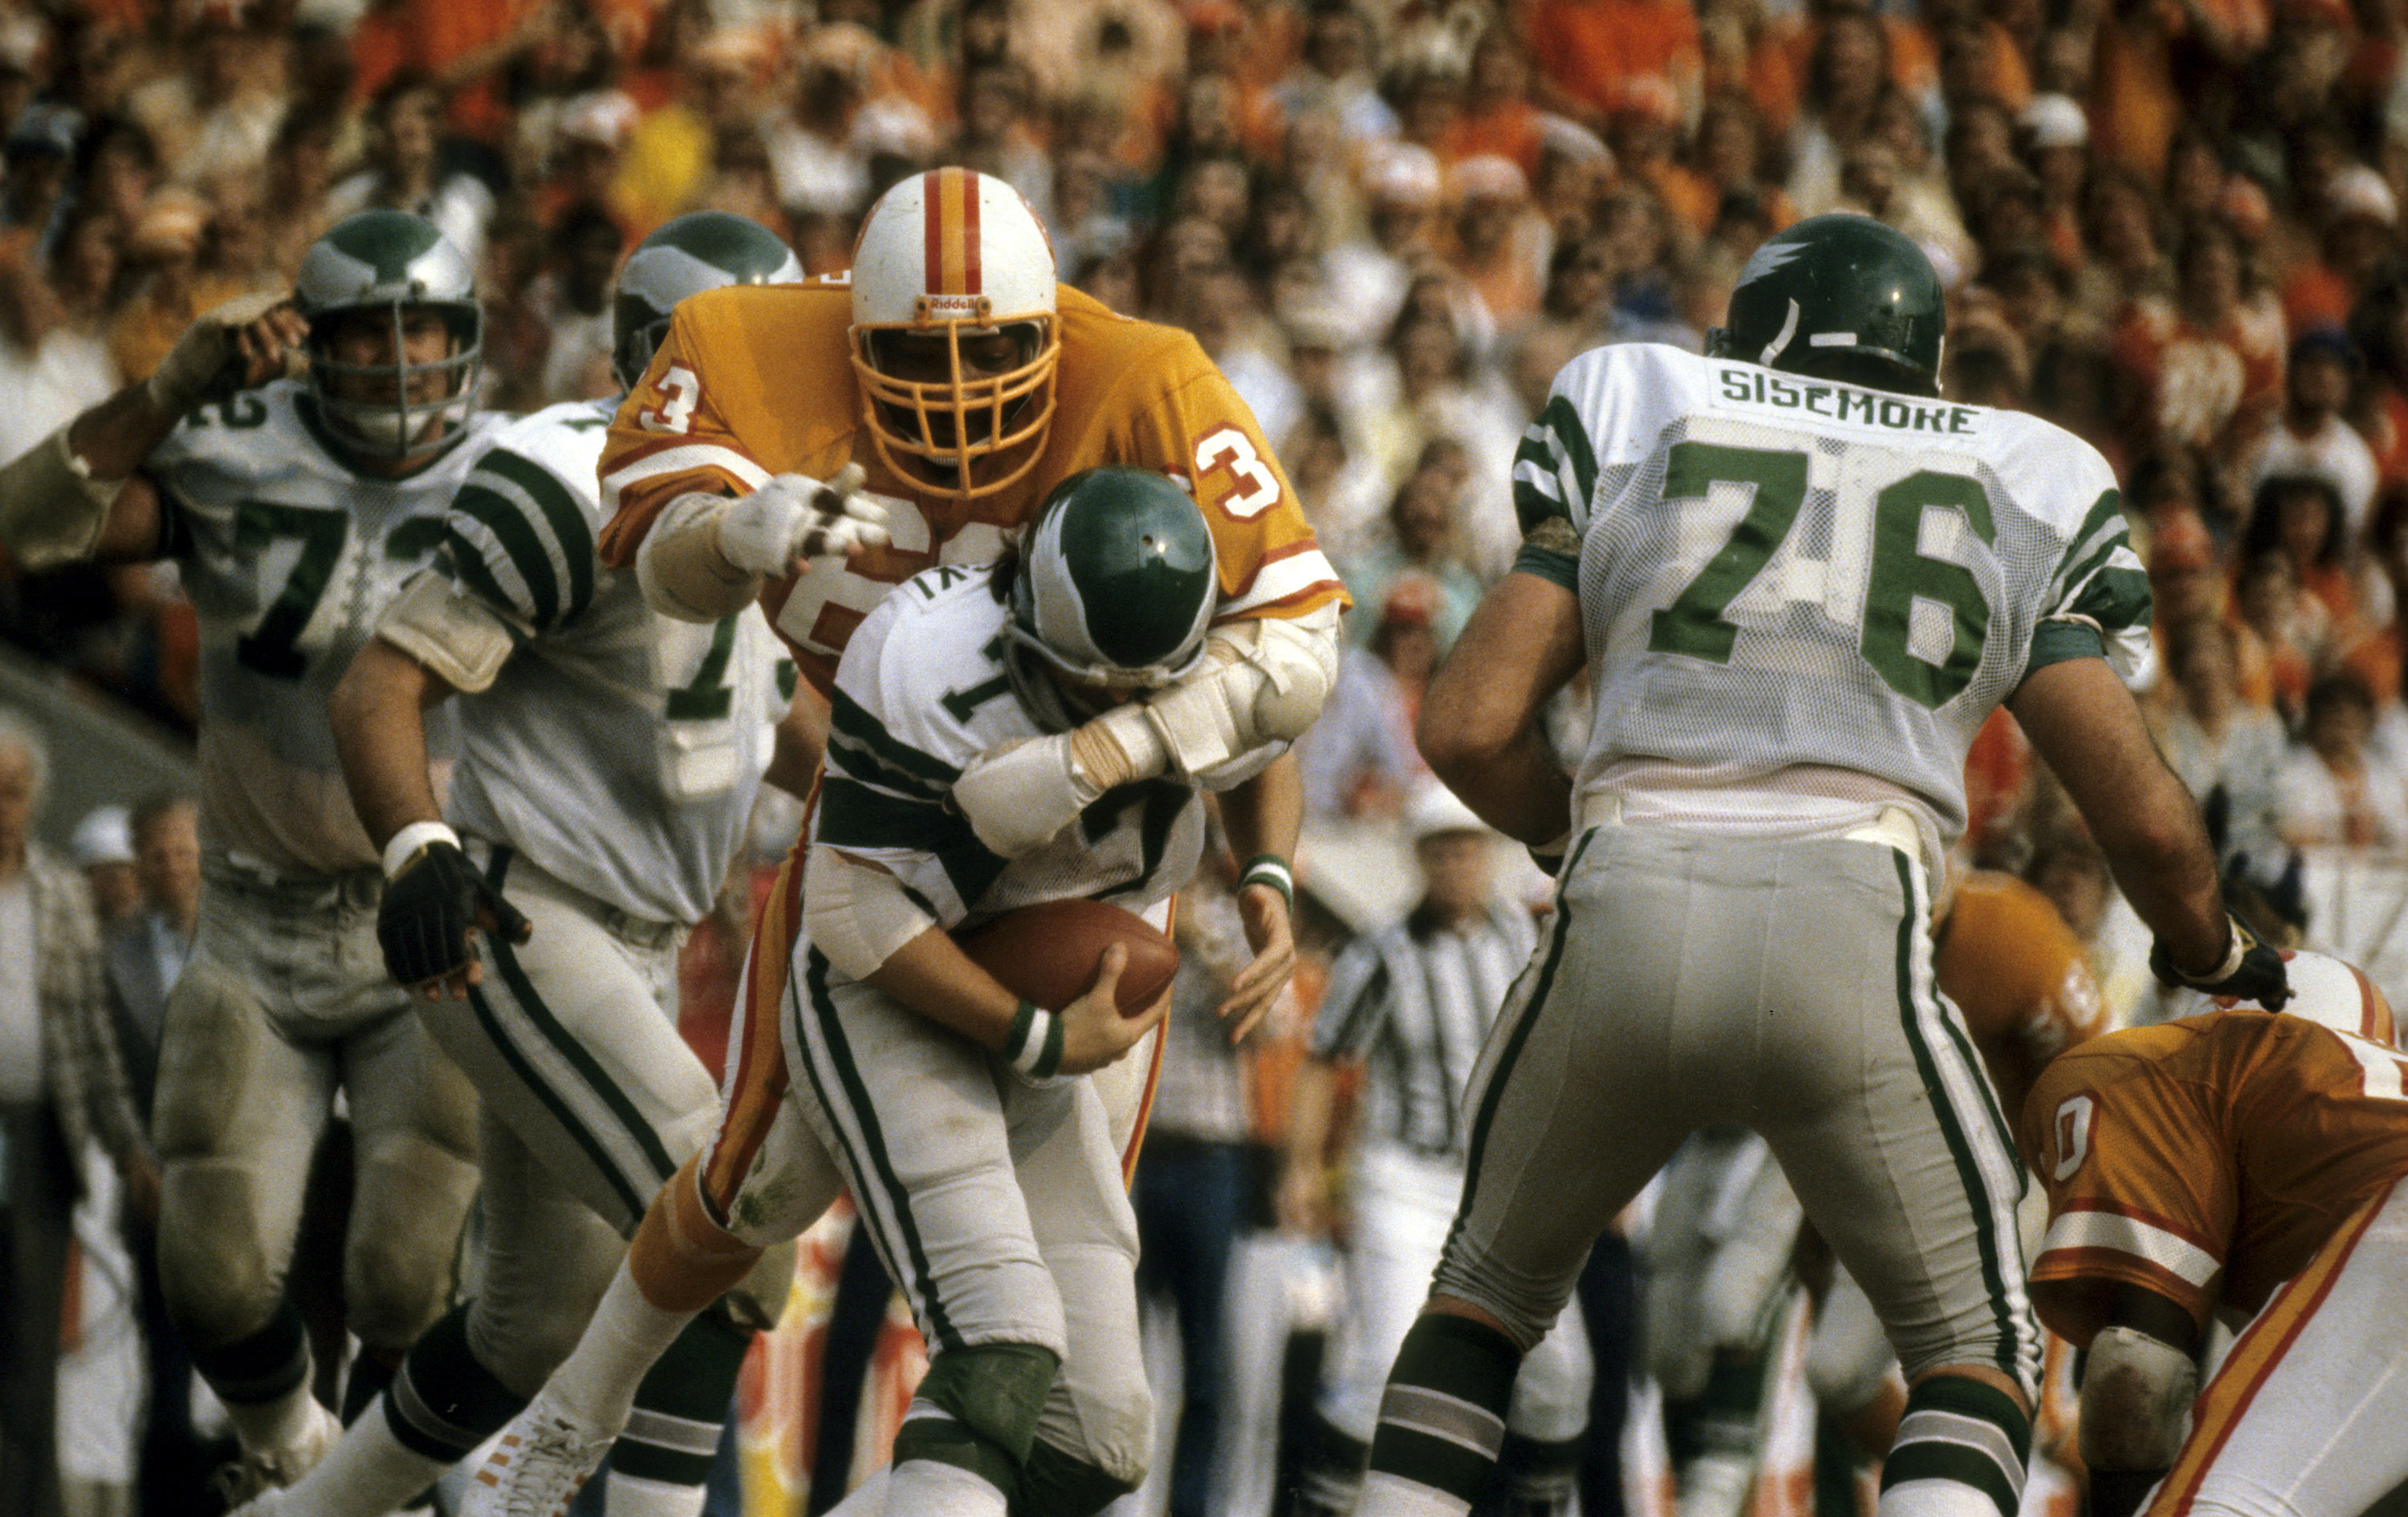 The Tampa Bay Buccaneers won their first-ever playoff game against the Eagles in 1979